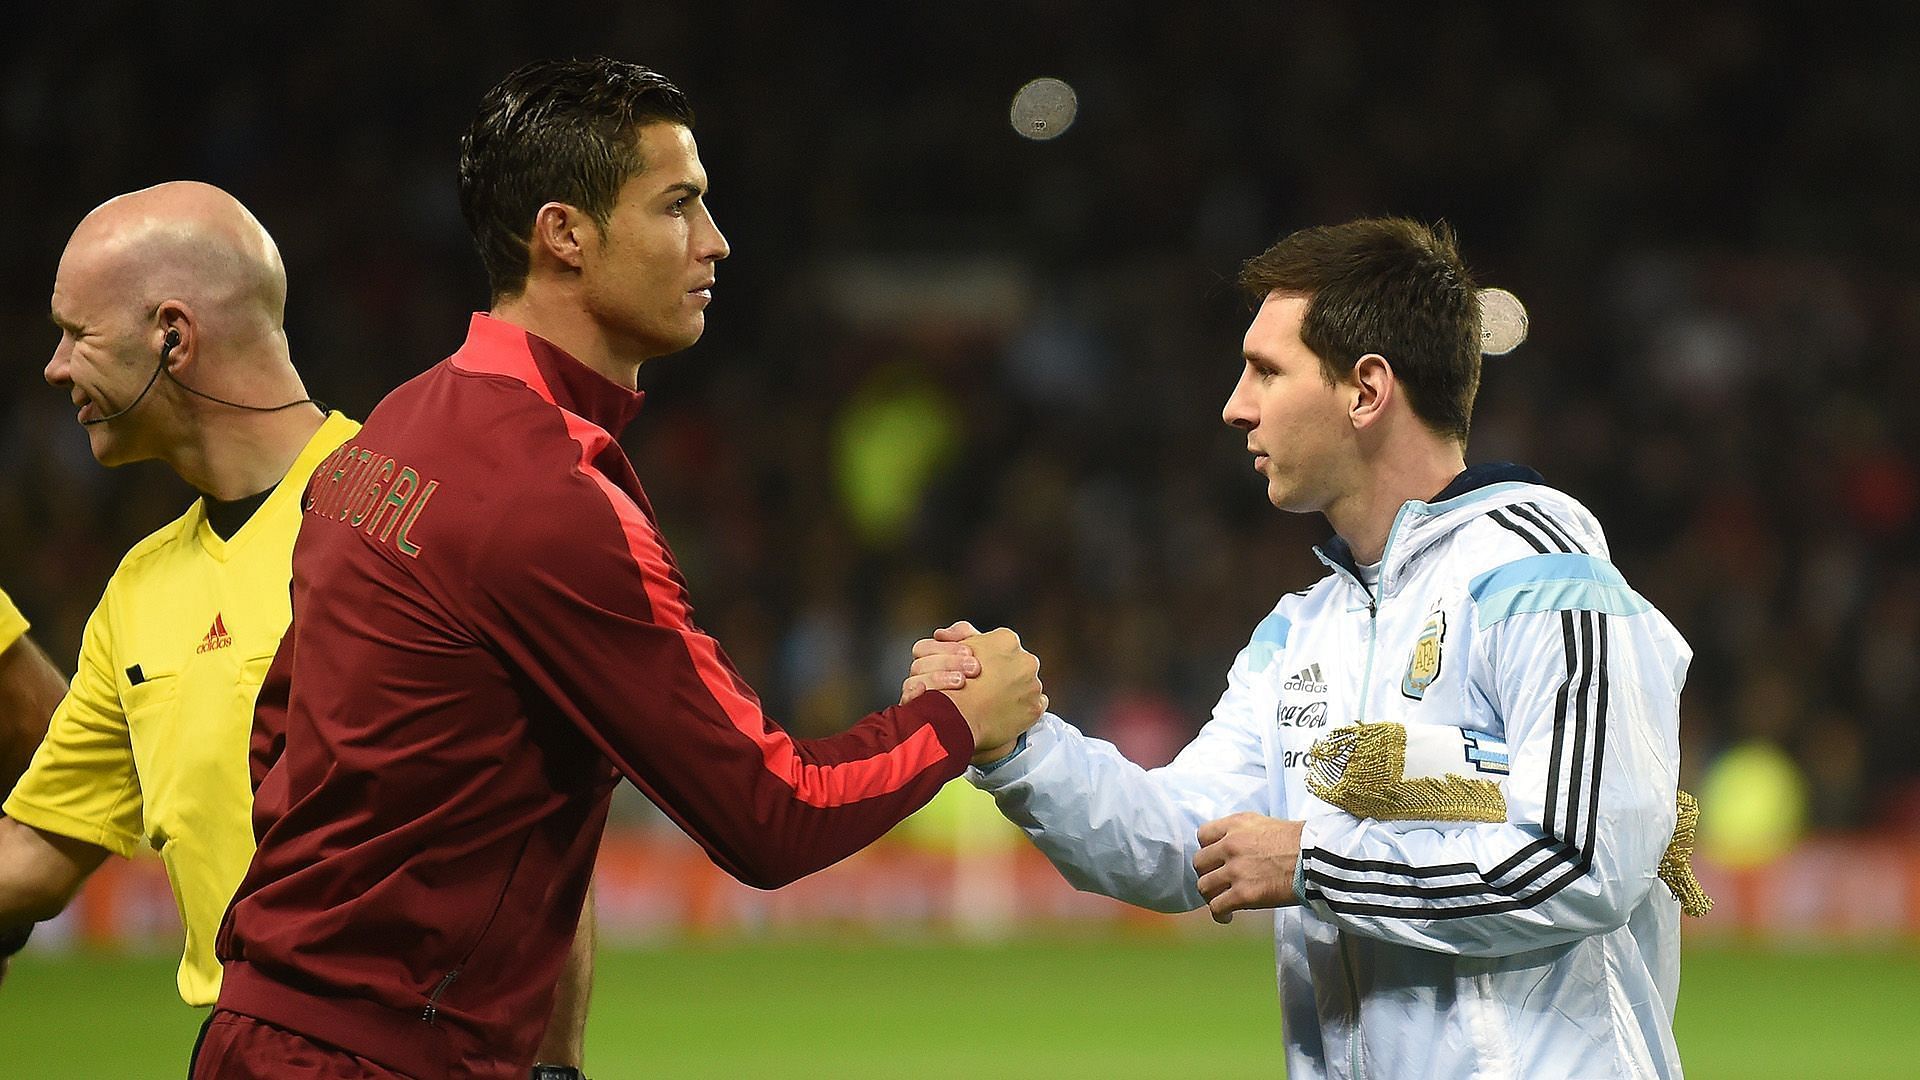 Cristiano Ronaldo (second left) and Lionel Messi (right) are unlikely to win the 2022 FIFA World Cup.